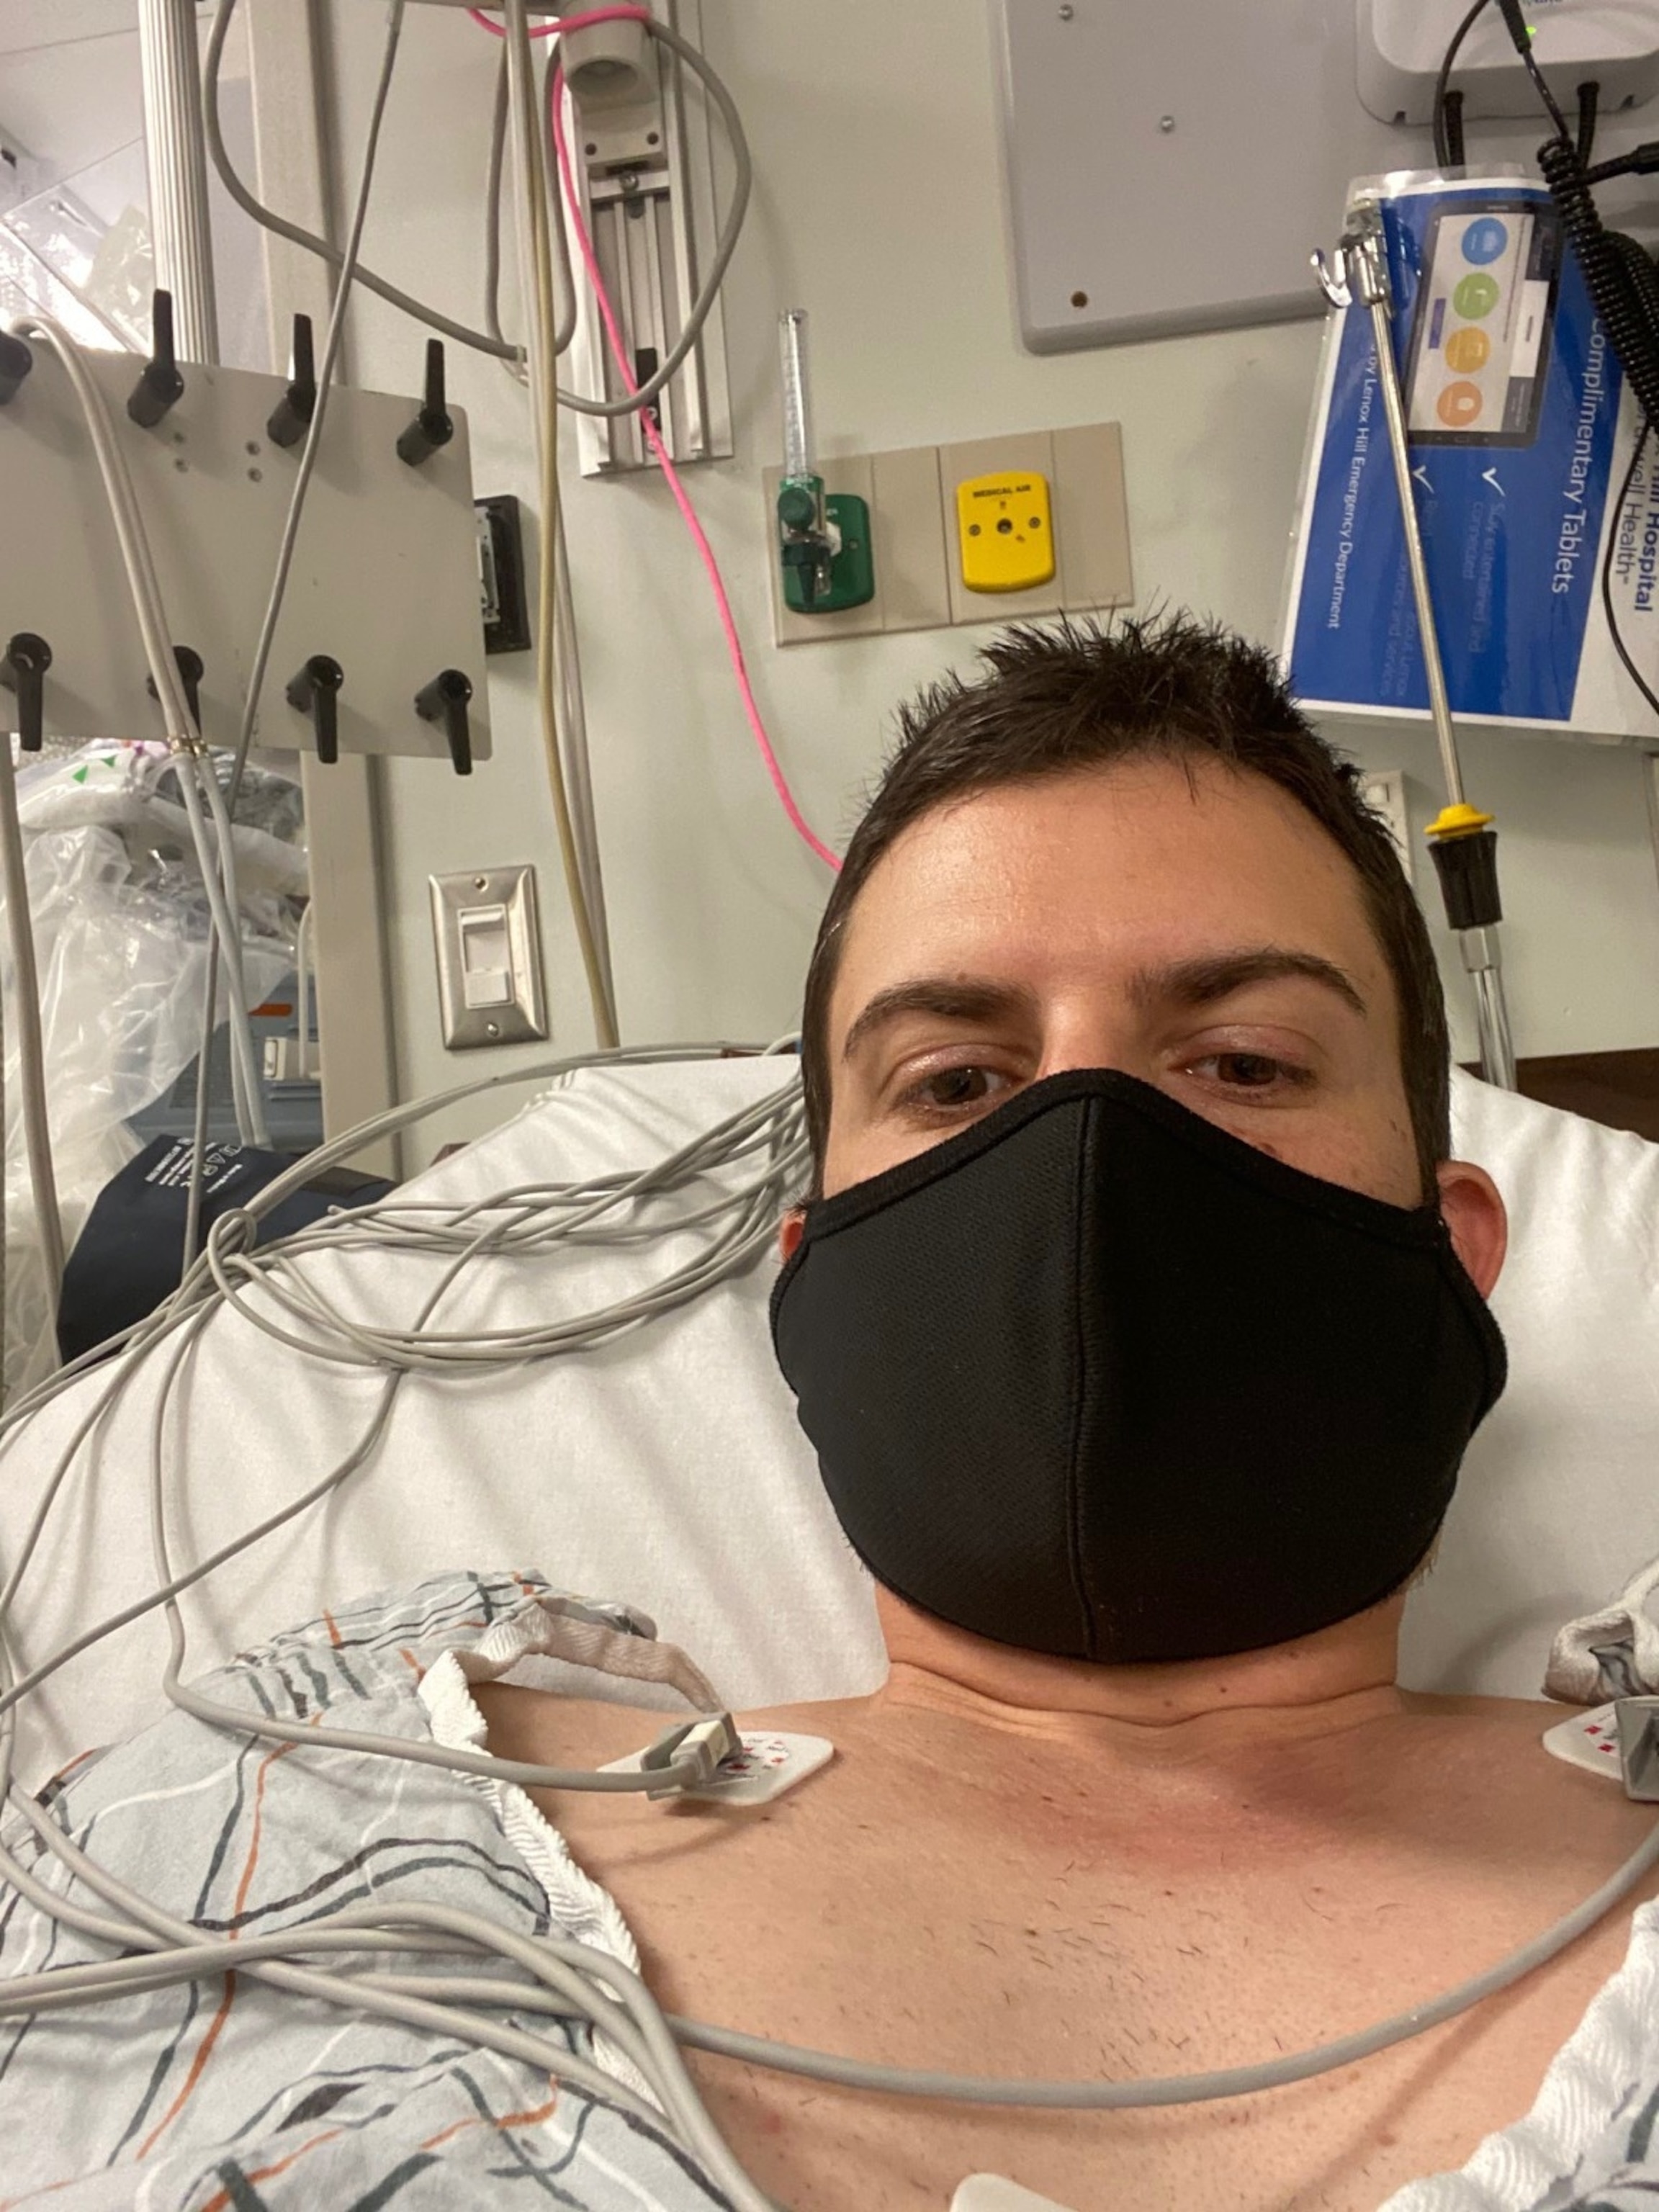 PHOTO: David Speal, 41, from New York City contracted COVID-19 in March 2020. He dealt with symptoms for months after clearing the infection and was diagnosed with long COVID in fall 2020.